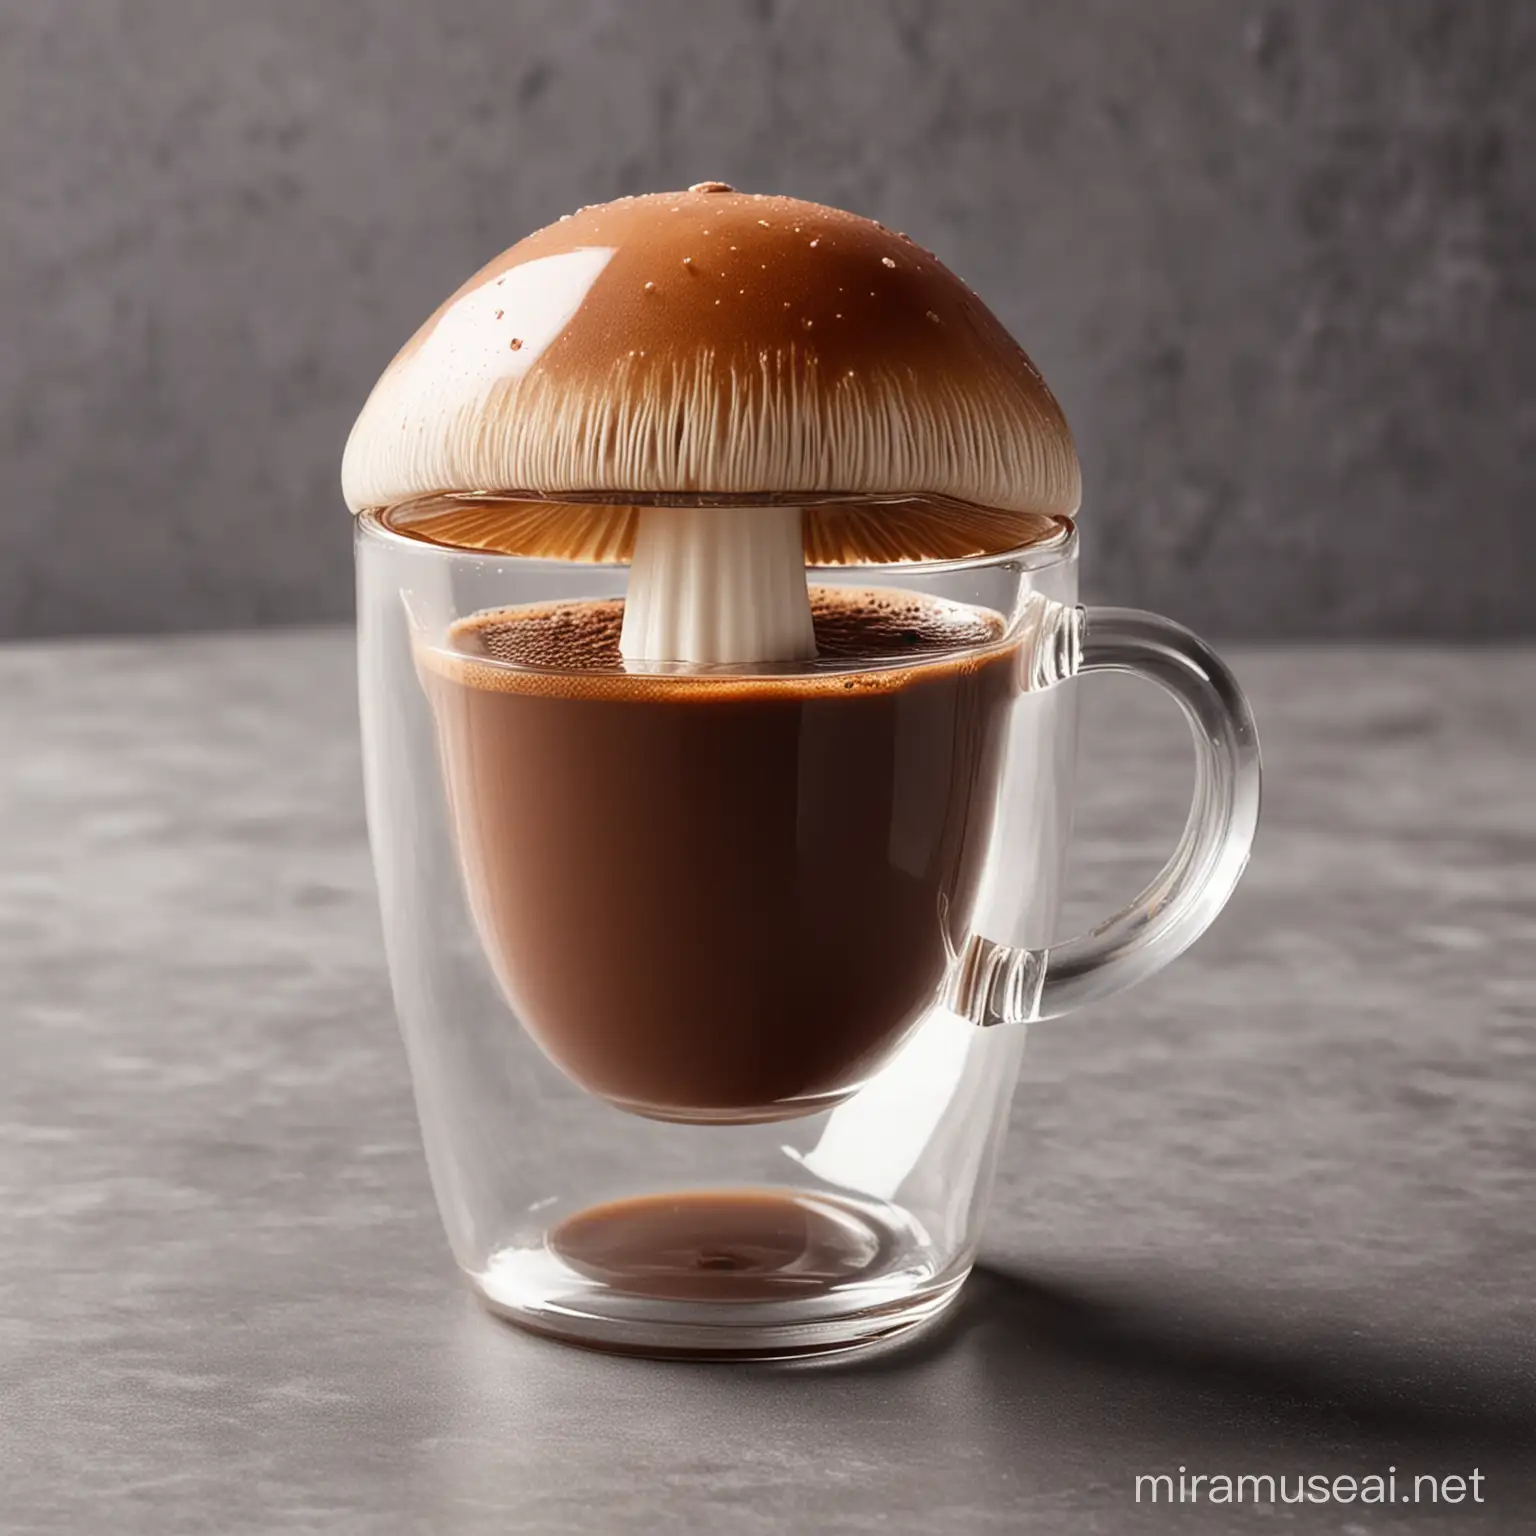 "A transparent cup in the shape of a mushroom filled with hot chocolate 
"